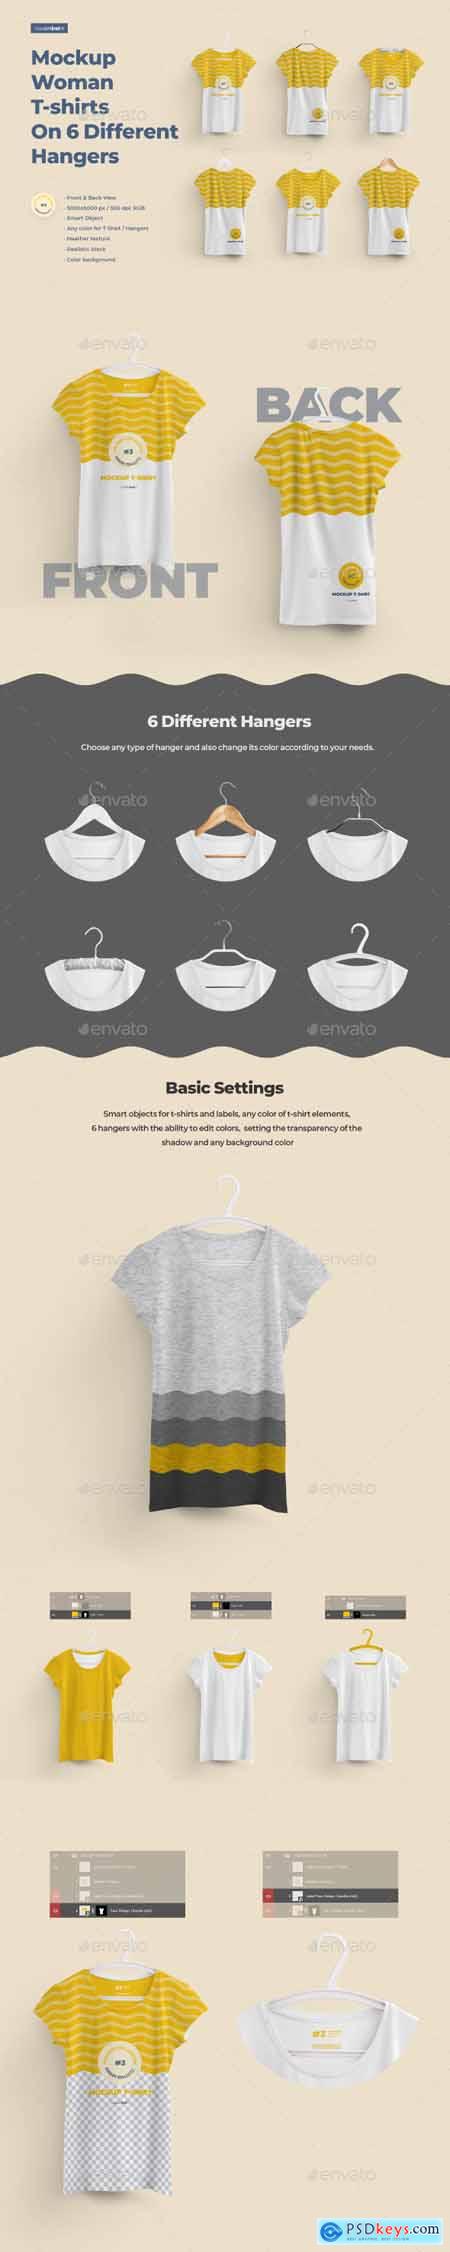 2 Mockups Woman T-shirts On 6 Different Hangers 27659659